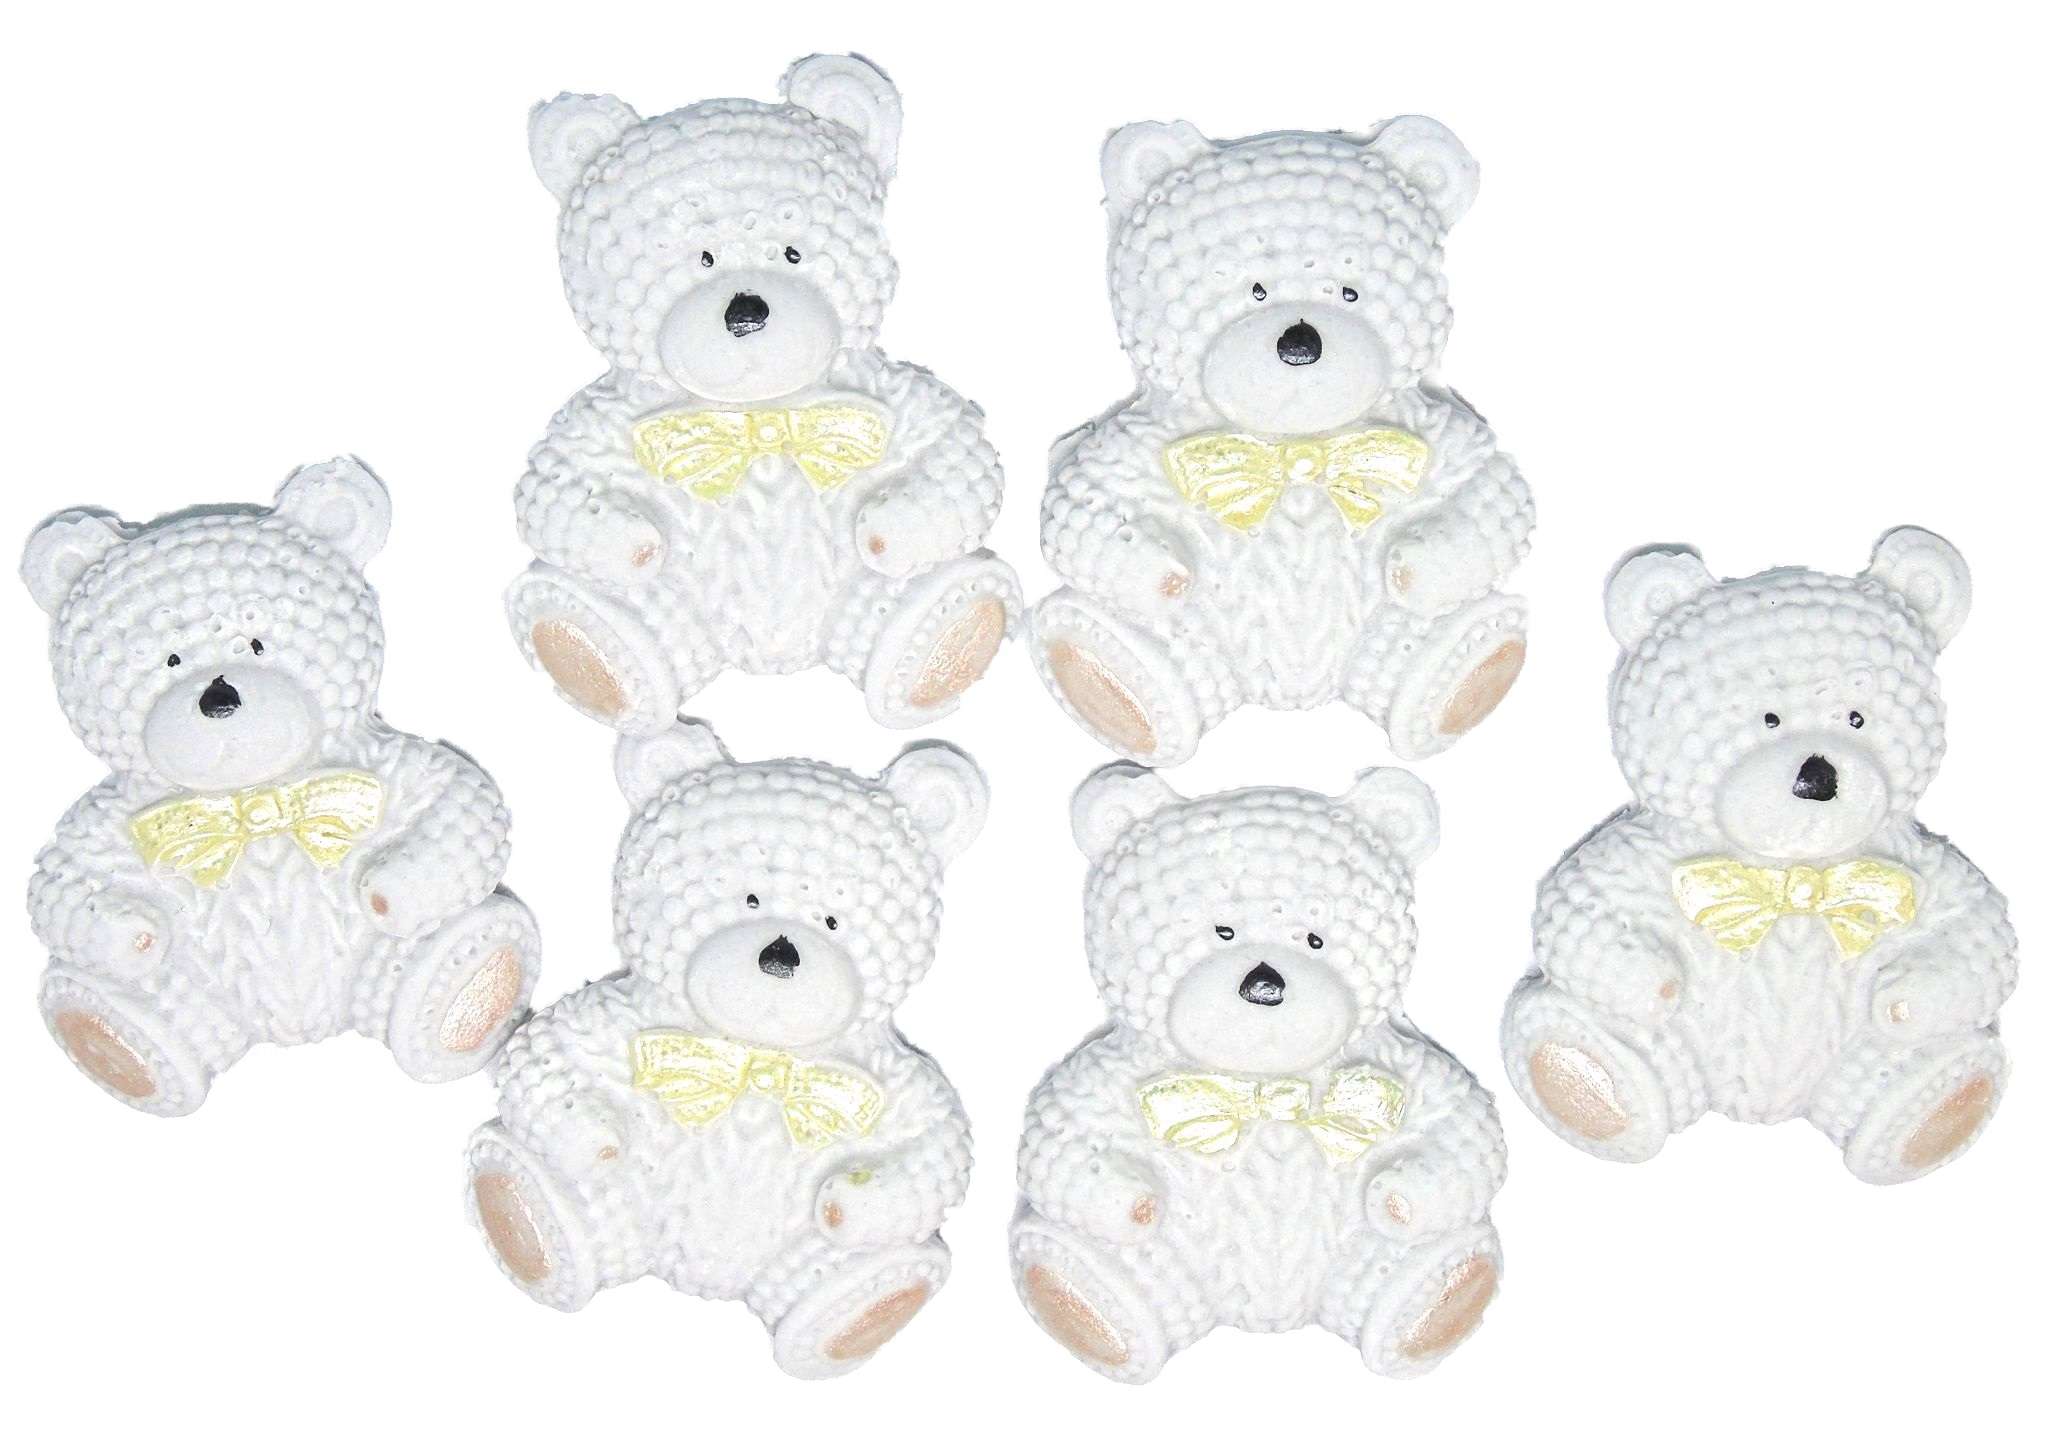 6 Grey knit teddysjpeg These  cute, knitted effect teddies will look great on your cupcakes and are sure to be a big hit with everyone and will look great on any Baby Shower, Birthday, or christening Cake or cupcakes. Available in either Grey Cream or Brown Approx Size: 4cm-3.5cm